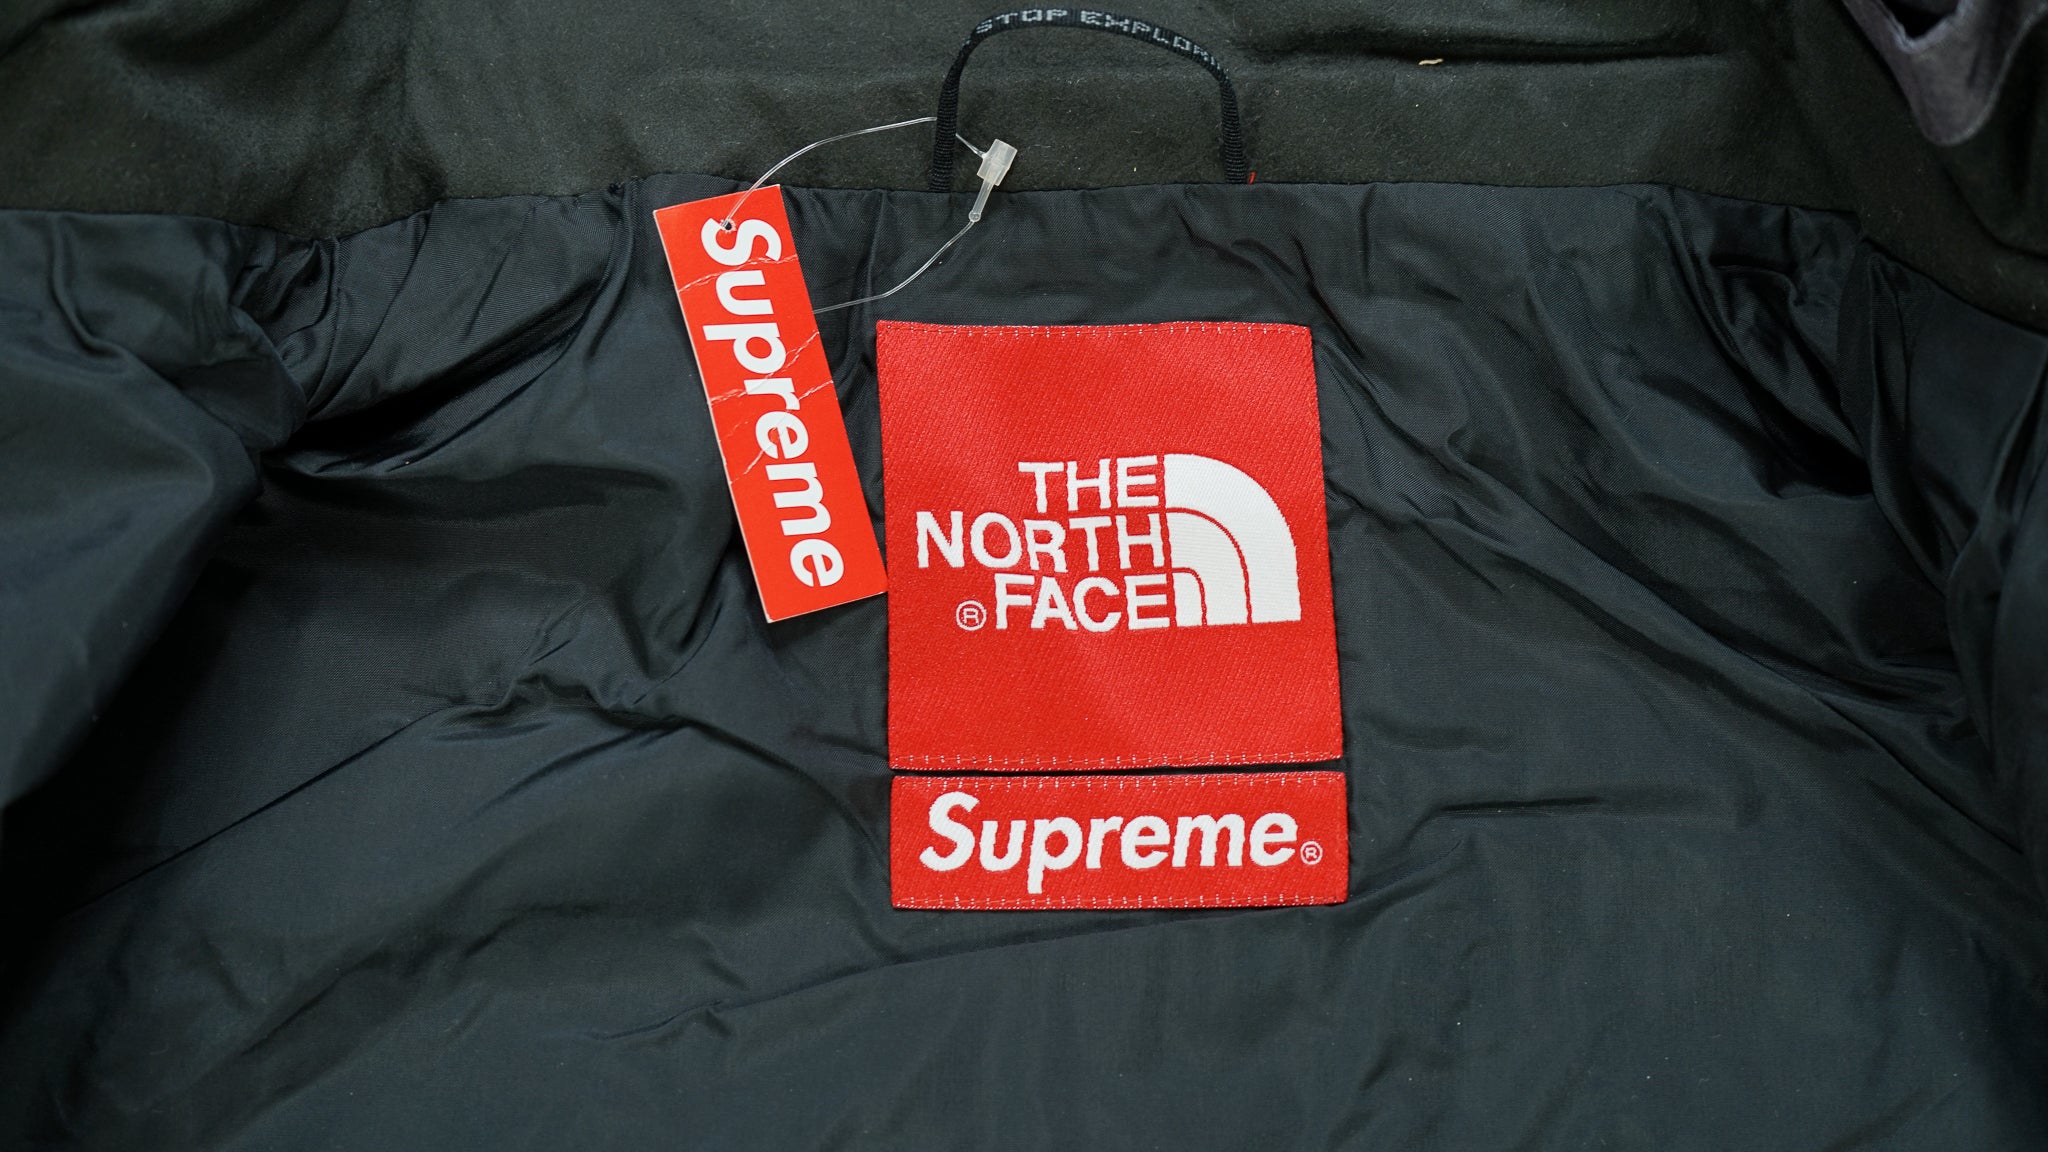 SS08 Supreme x The North Face 